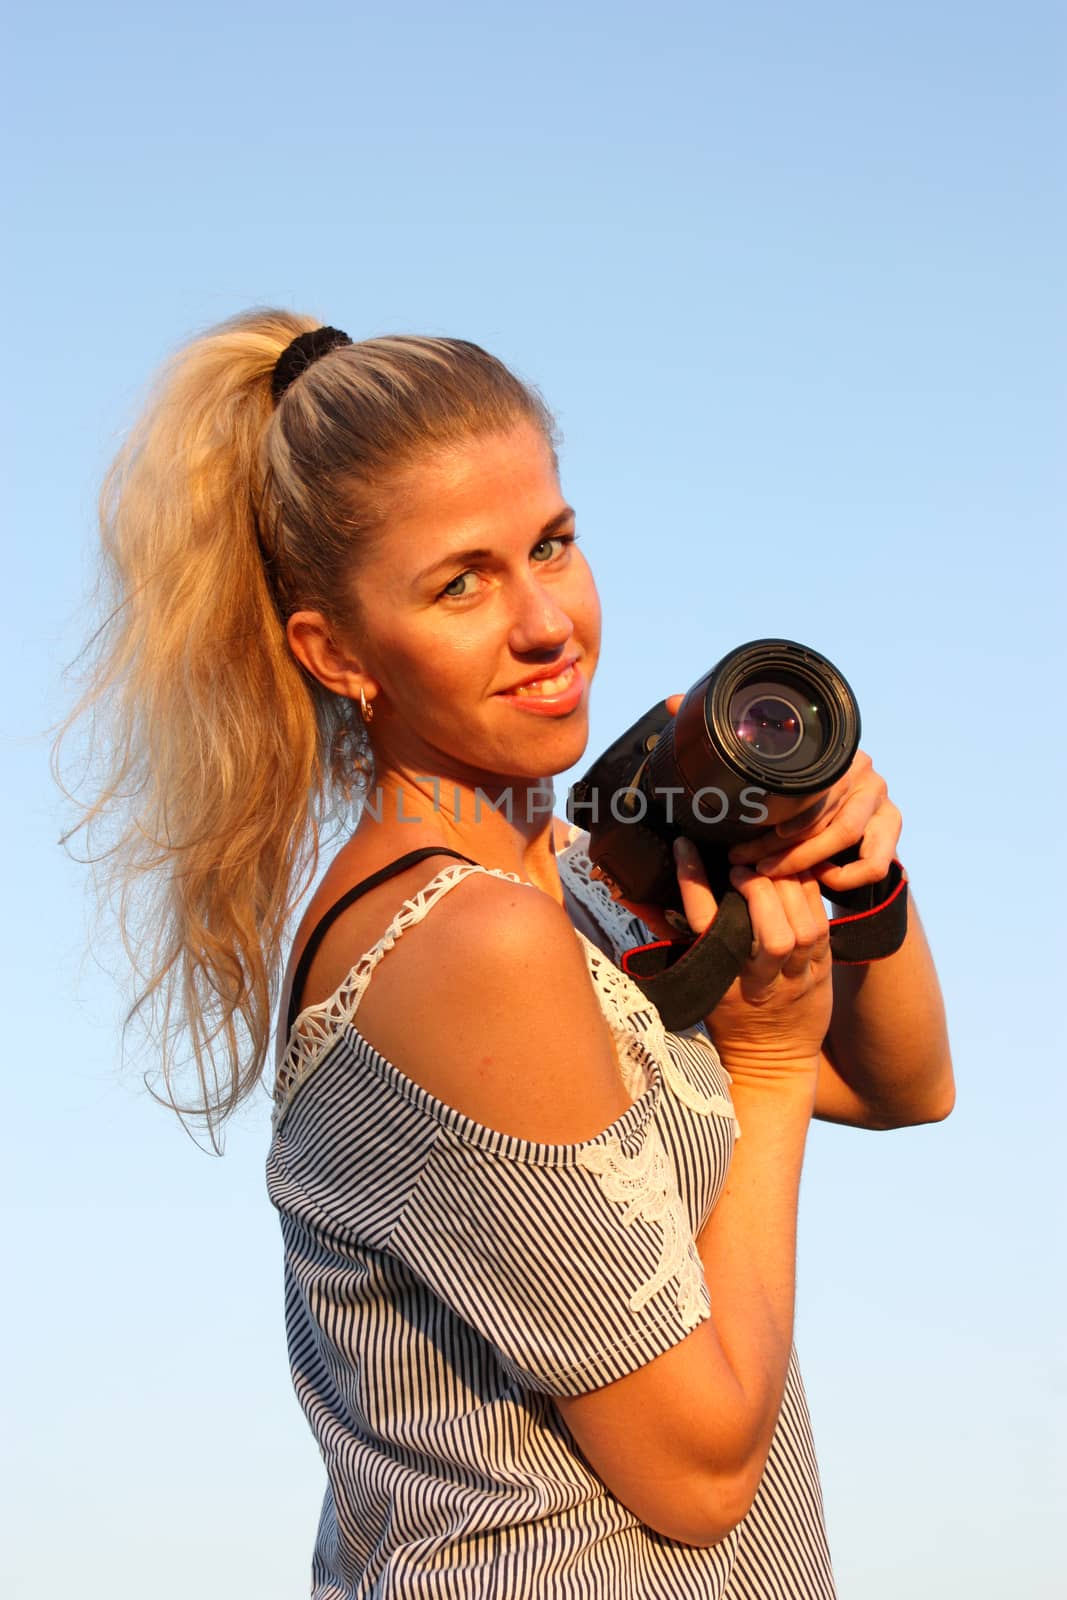 Blonde girl with camera. Smiling and looking in the camera.